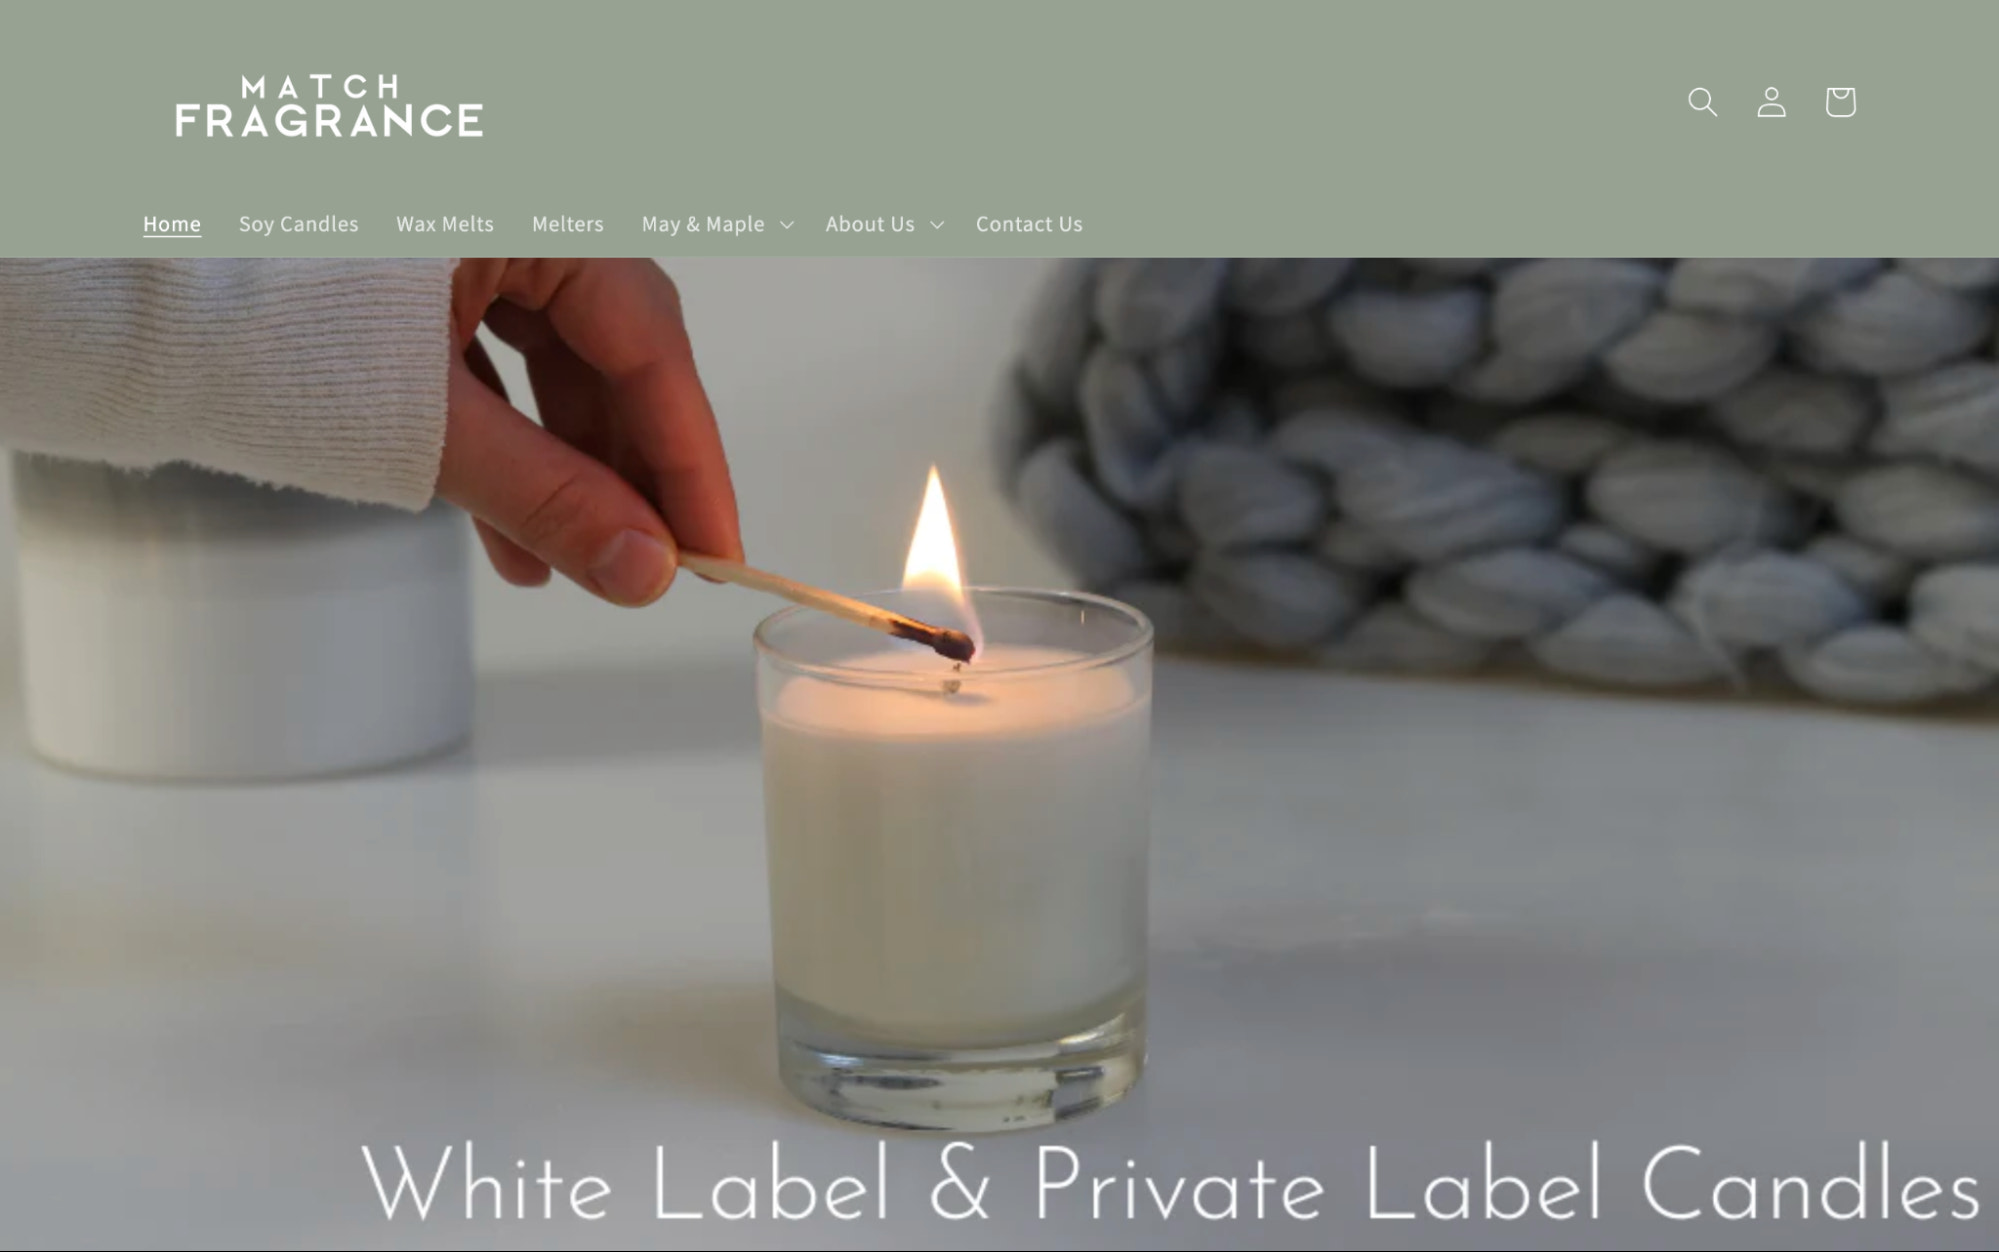 Image of a woman lighting a candle on Match Fragrance’s homepage